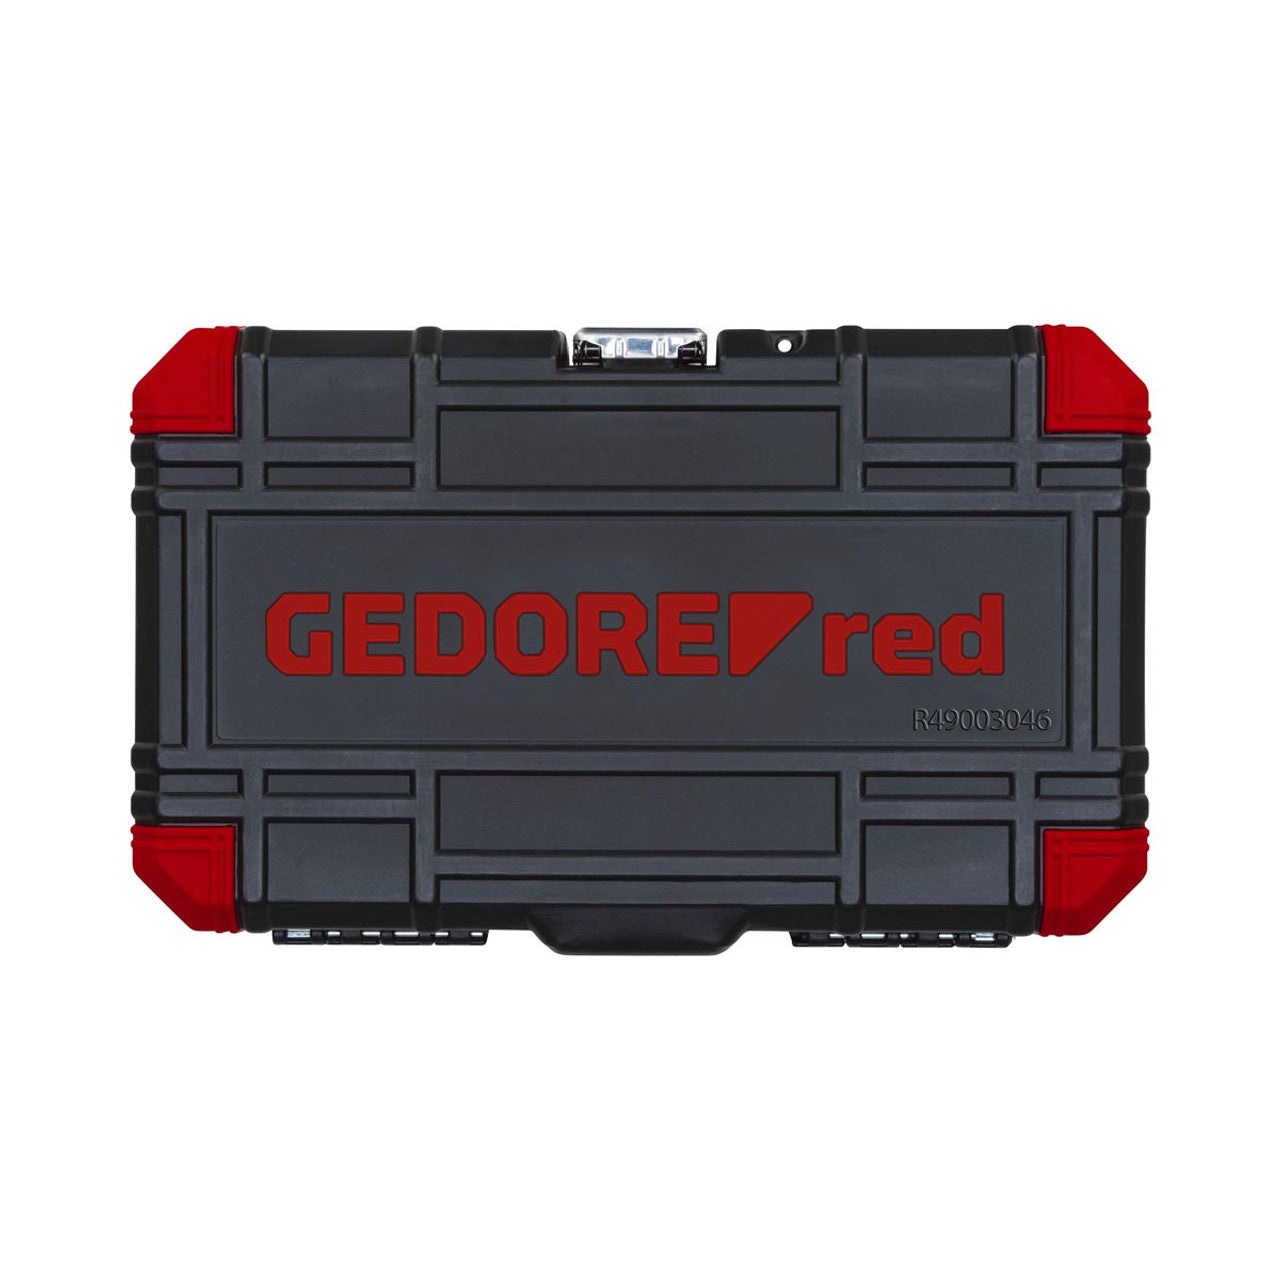 Gedore Red 1/4″ Drive Socket Set 46pcs Power Tool Services